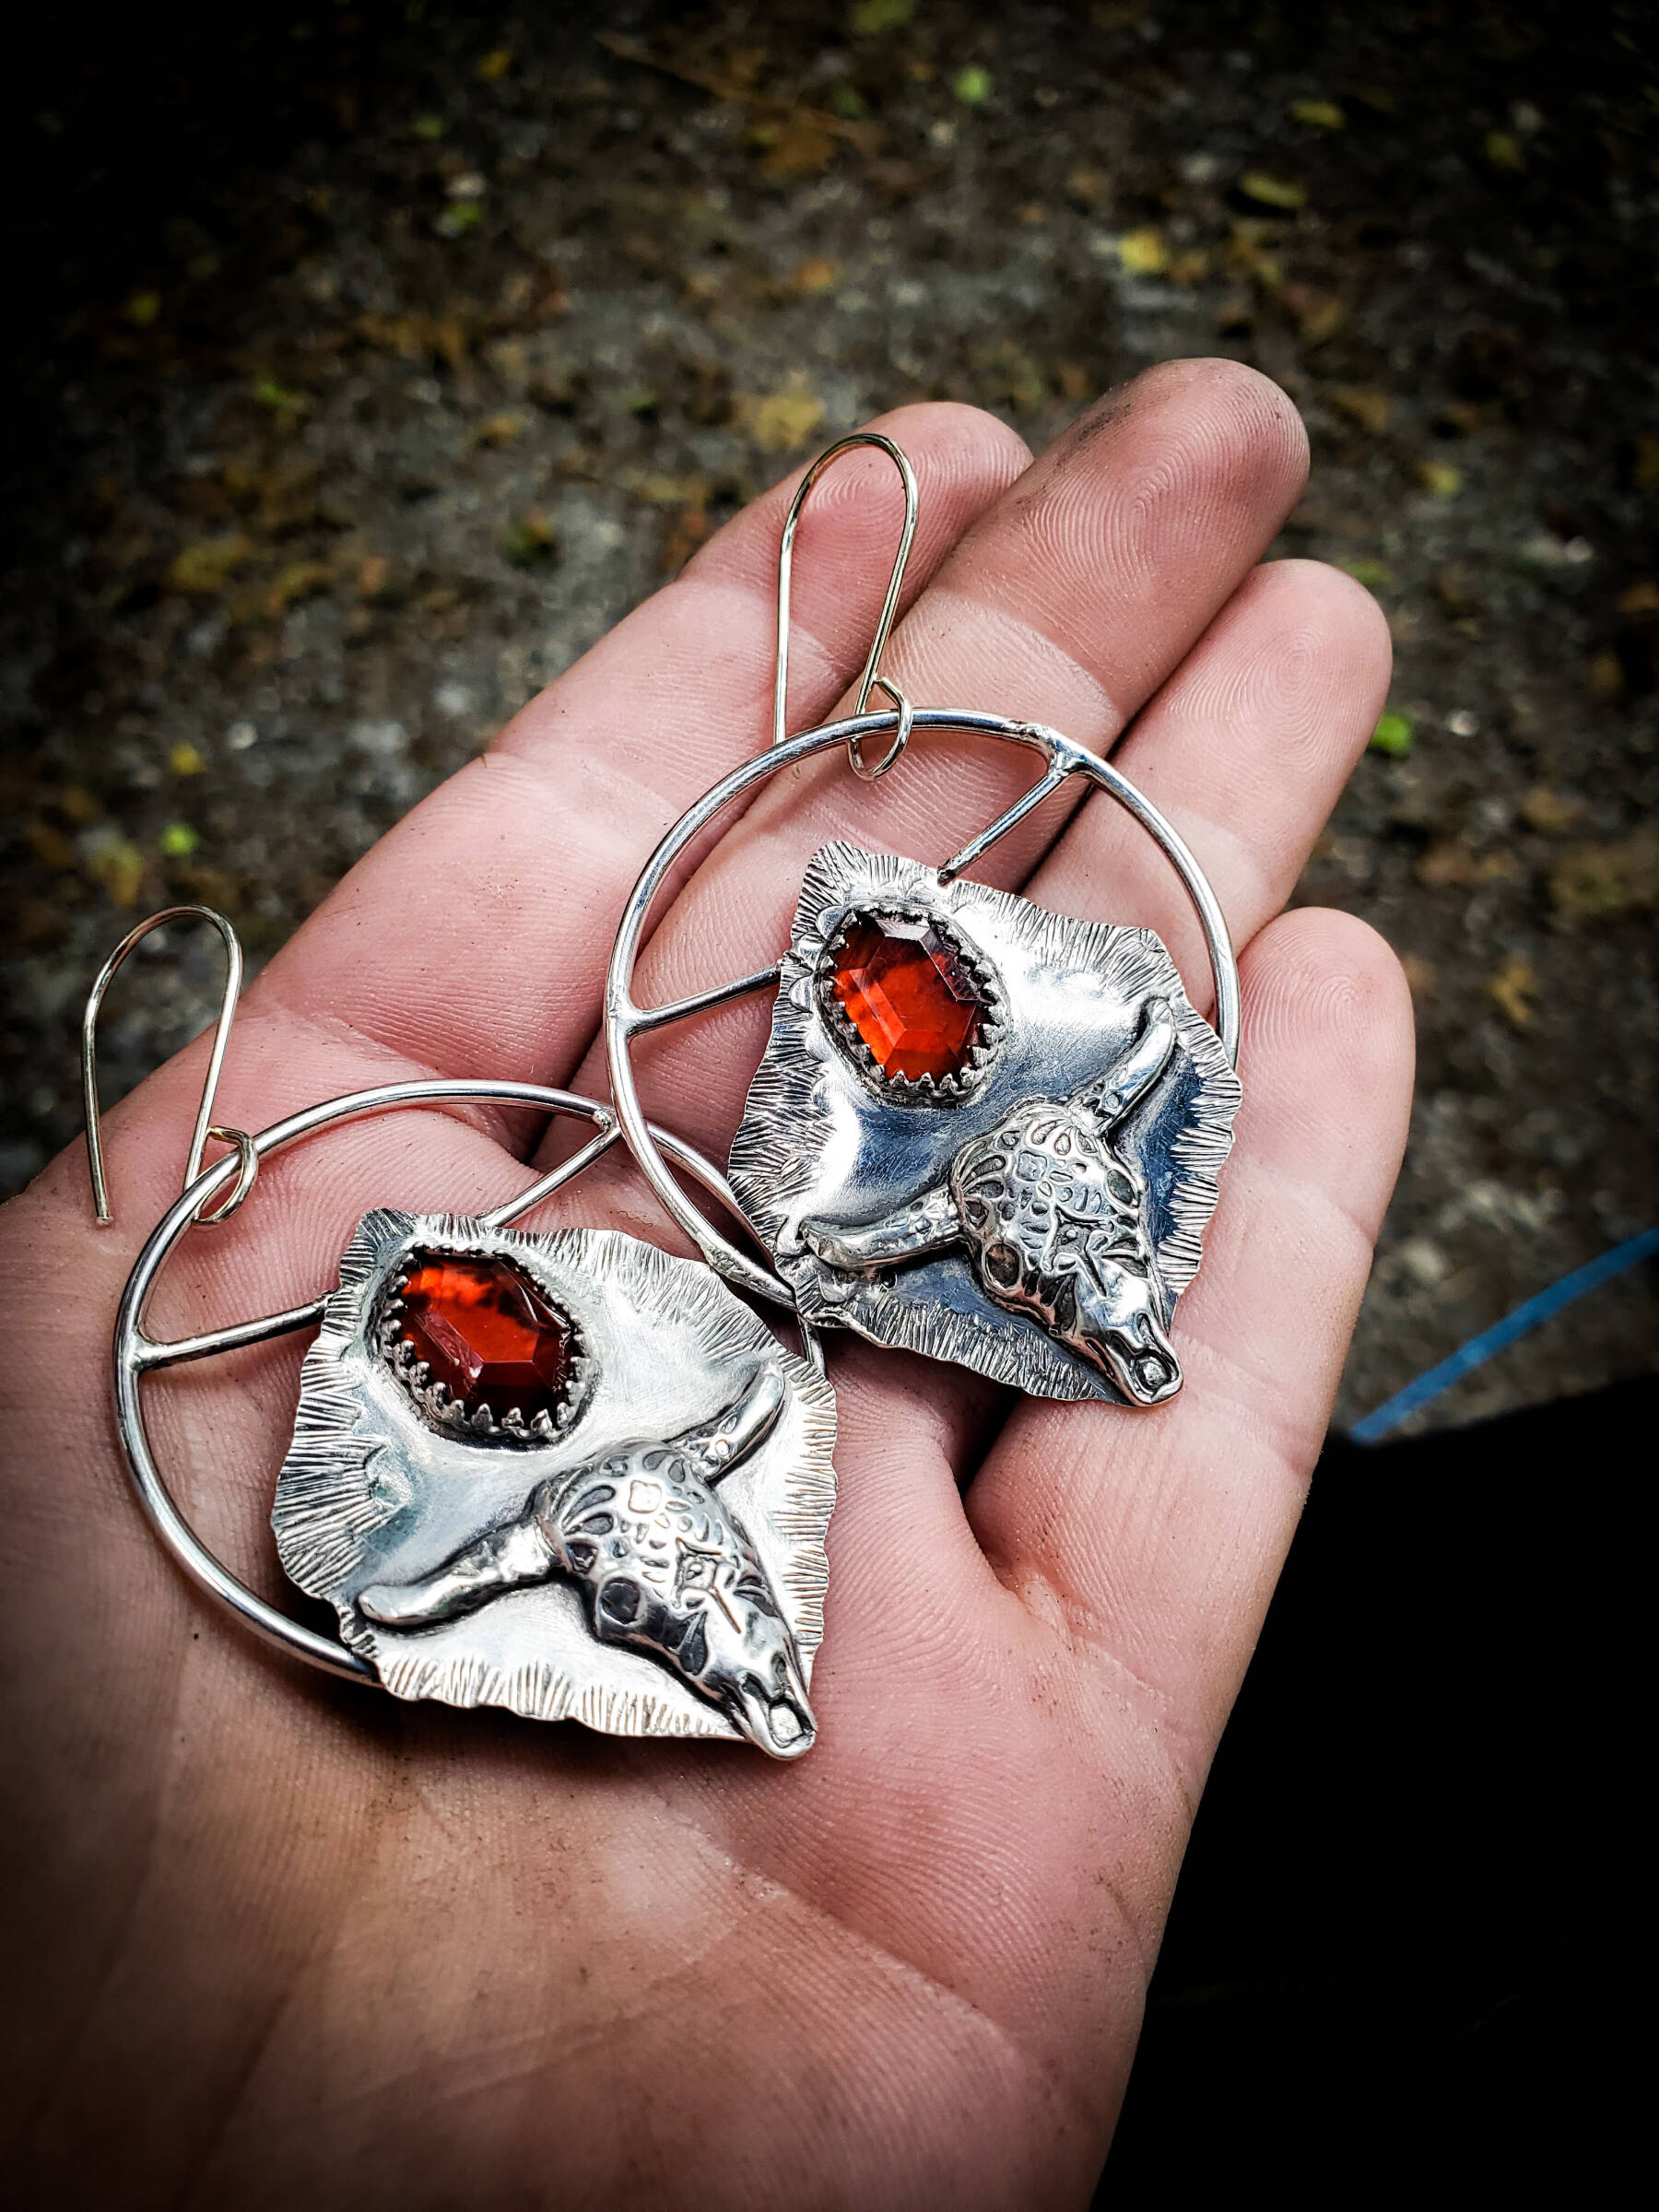 Hand-fabricated sterling silver hoops with silver clay cow skulls and two-step cut garnet cabochons were created by Homer artist Carley Conemac this past July. Photo provided